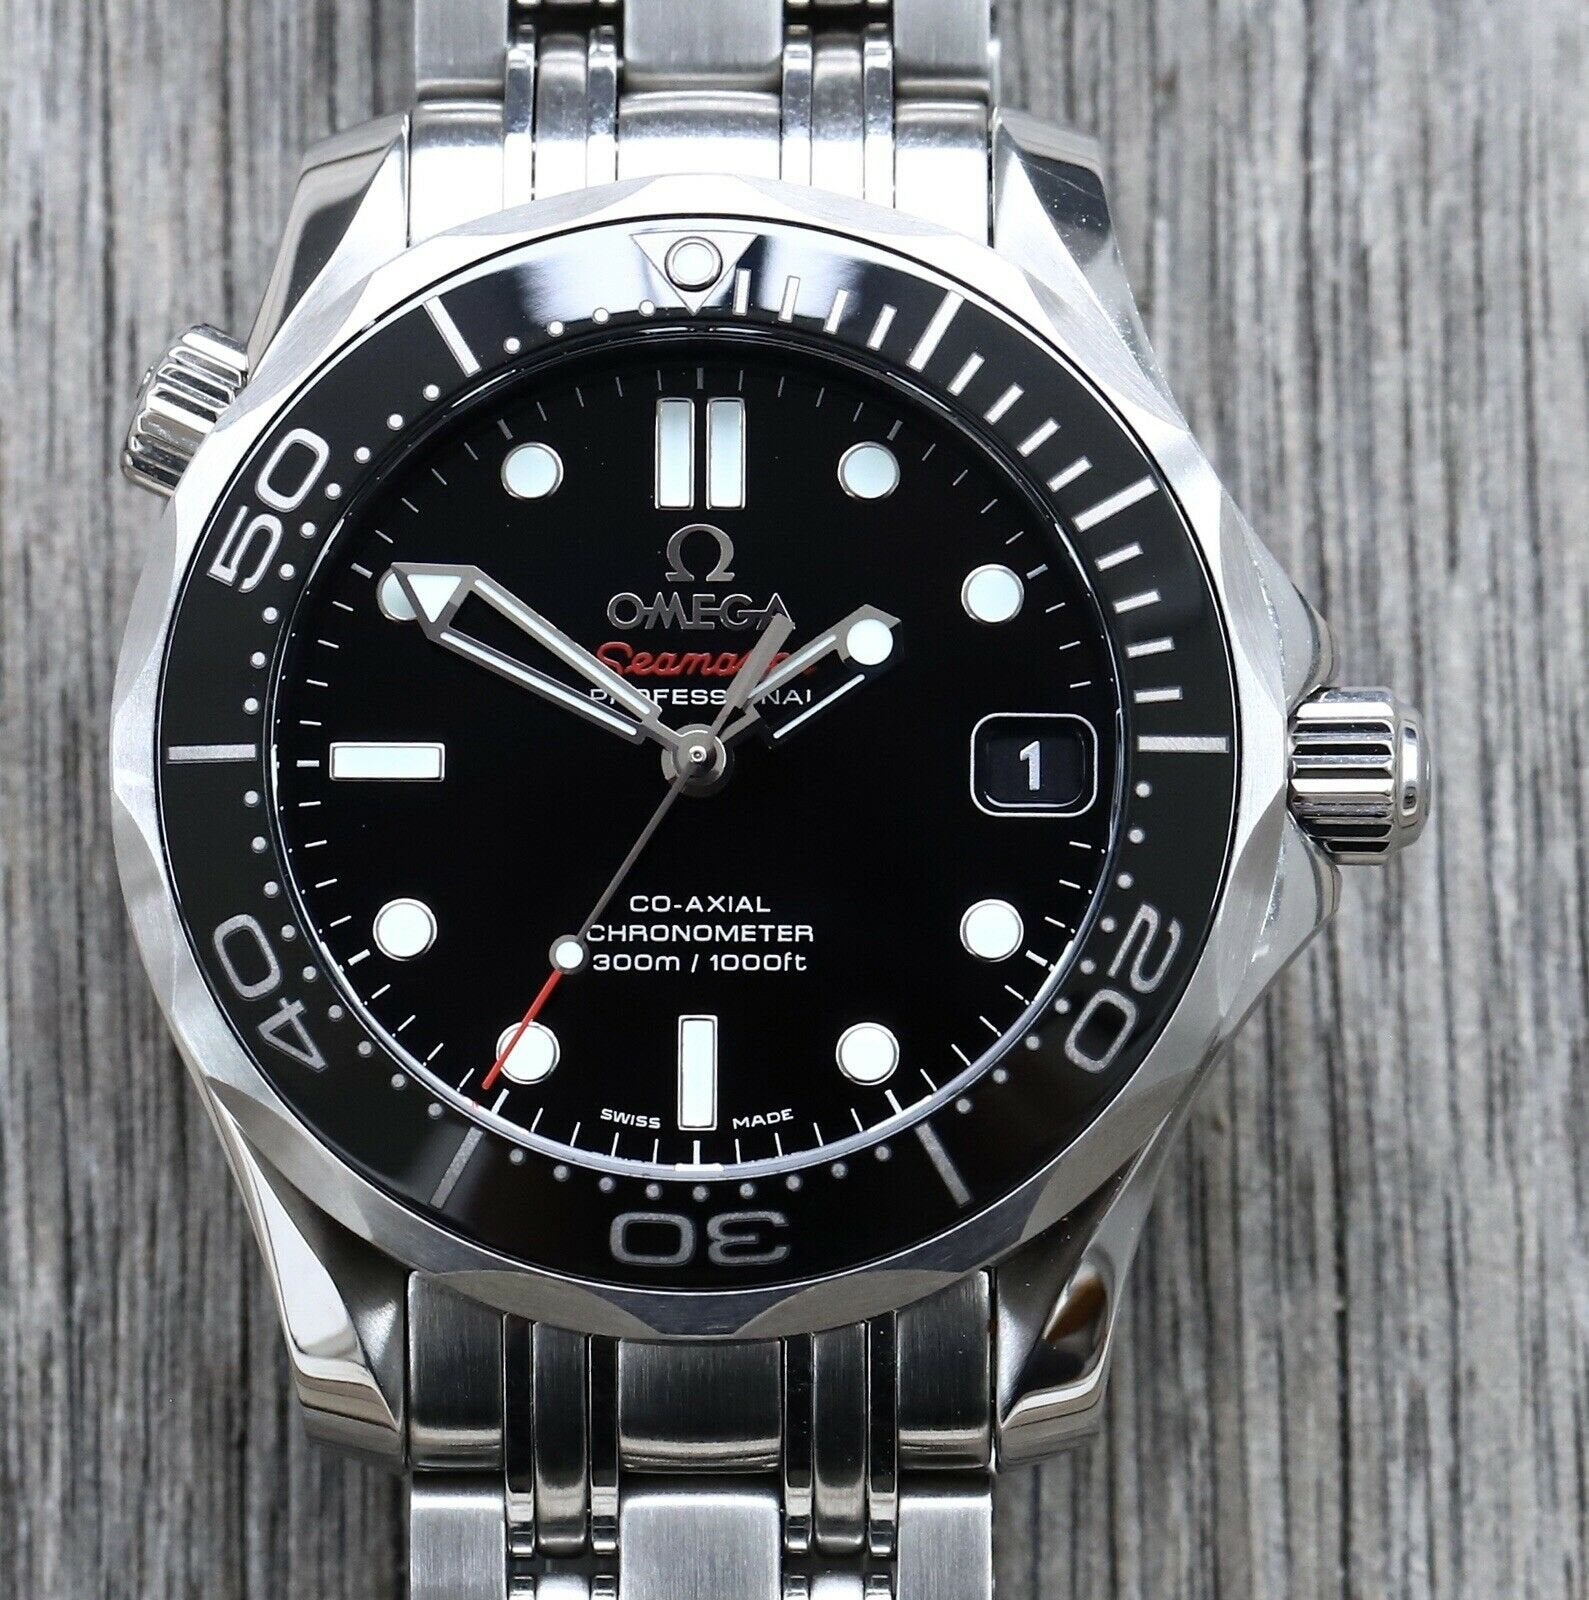 Omega_Seamaster_Diver_300M_Co-Axial_Black_36.25mm_212.30.36.20.01.002_-_2019_Watch_Vault_01.jpg